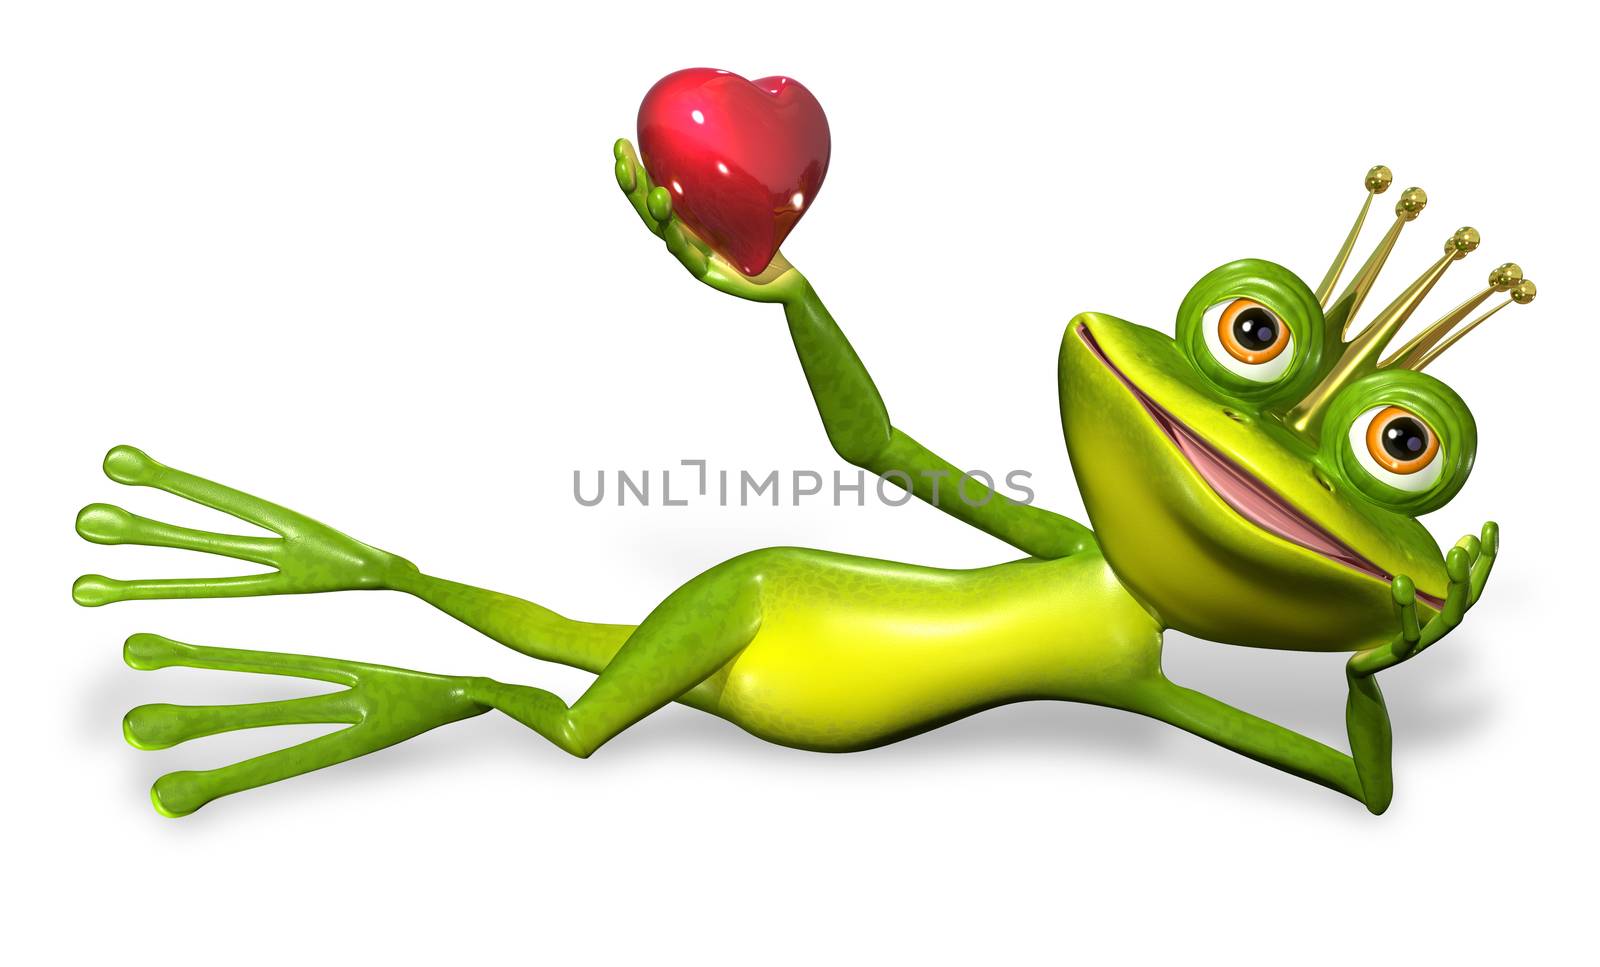 abstract illustration of the green frog princess